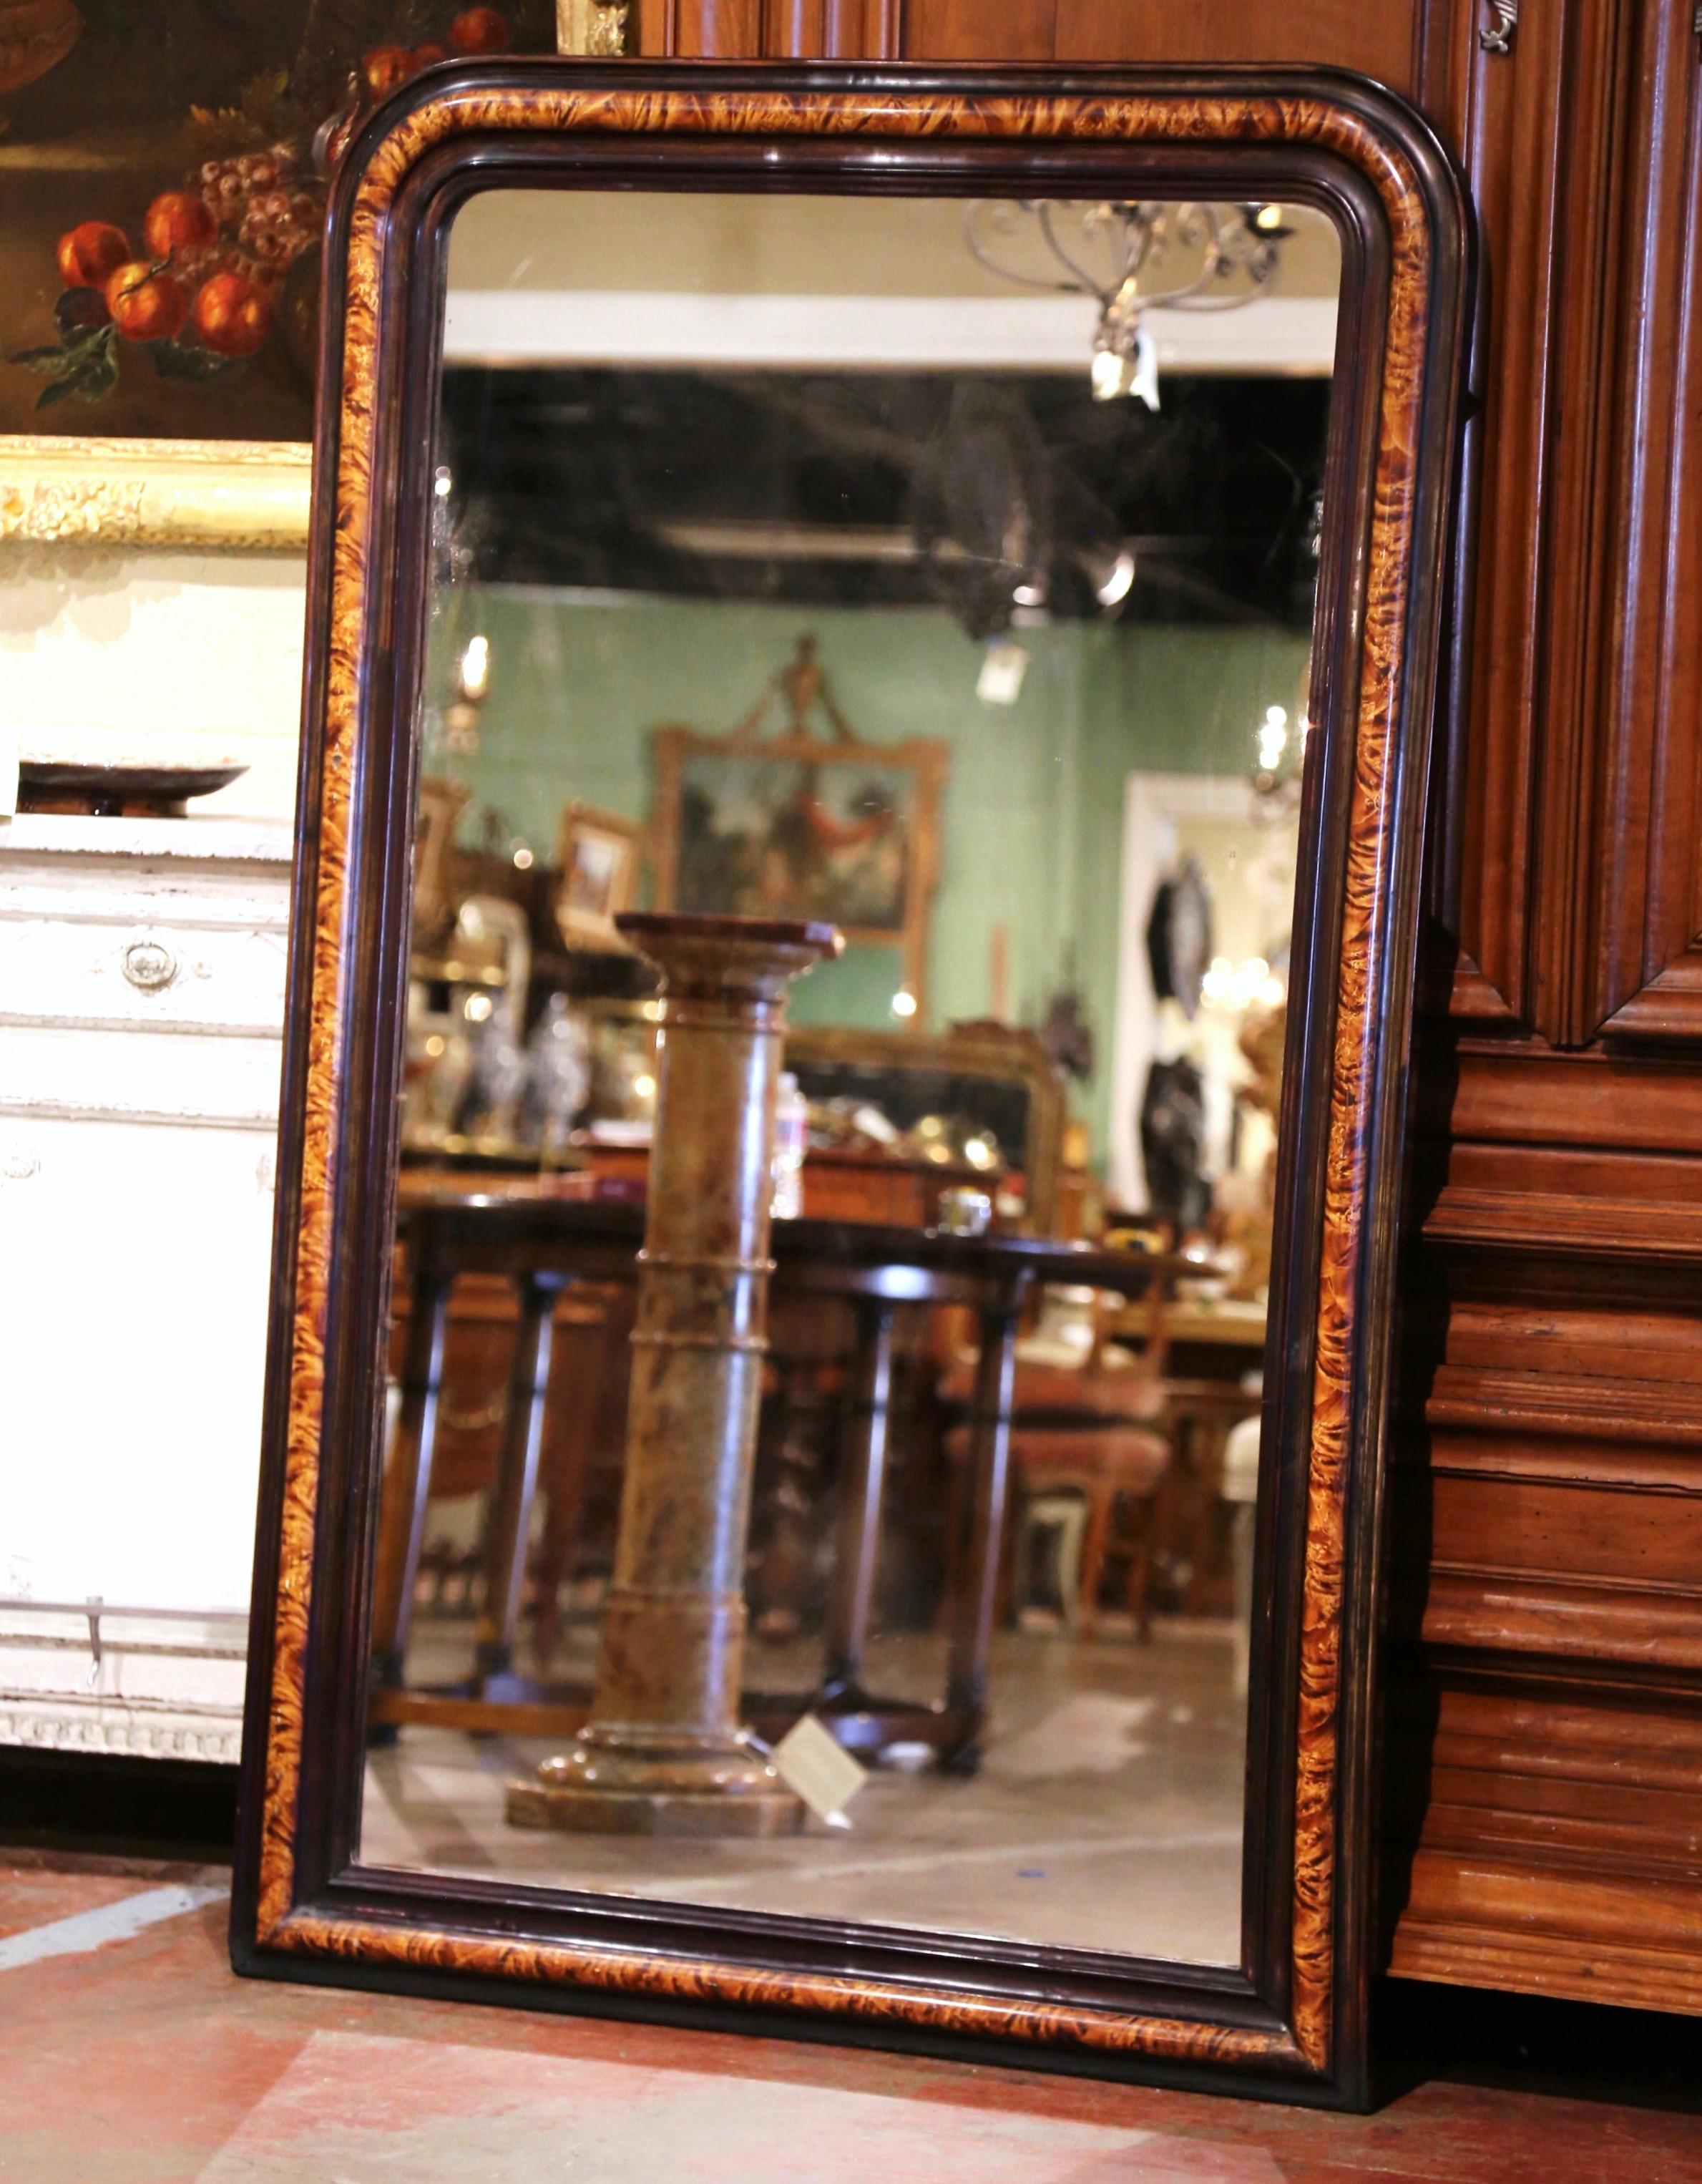 This elegant antique wall mirror was crafted in France, circa 1870. The tall frame is decorated with faux burl wood motifs in between patinated brown paint finish. The large two-tone mirror is in excellent condition with its original mercury glass